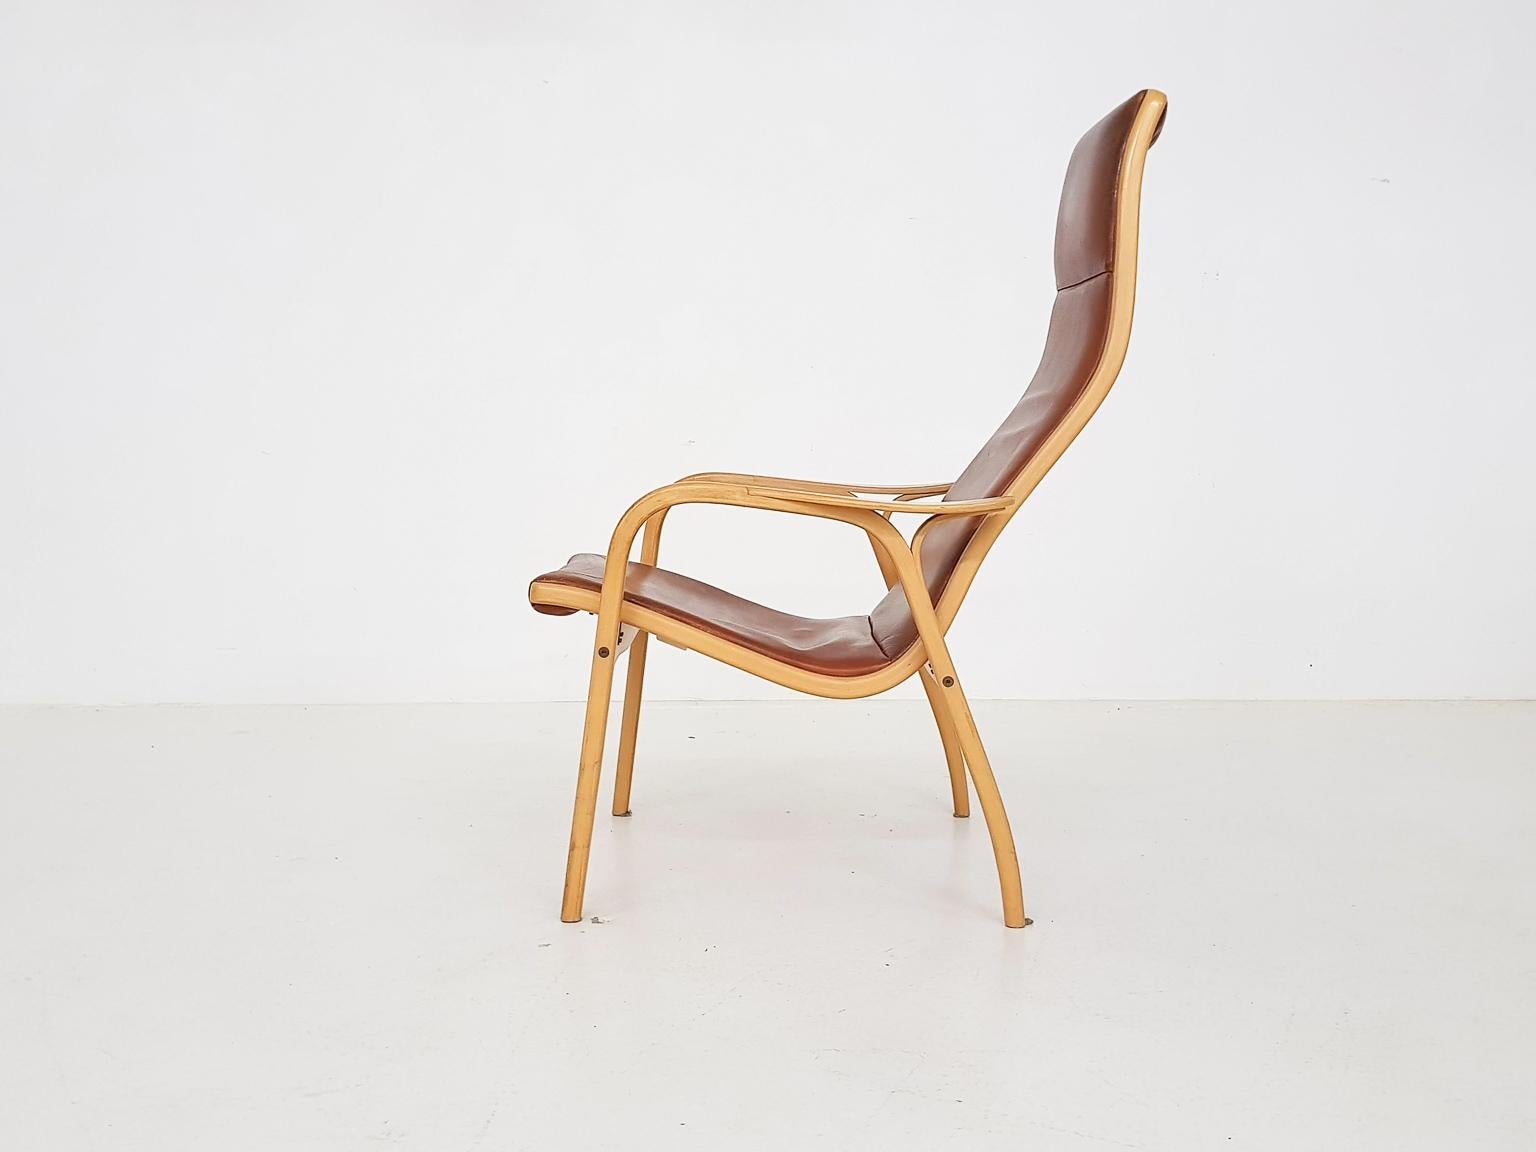 One of the most famous and popular vintage design lounge chairs of Sweden: the Lamino by Yngve Ekström. A timeless design produced by Swedese.

This chair is designed in 1956. They are often upholstered in fabric, but this one is originally done